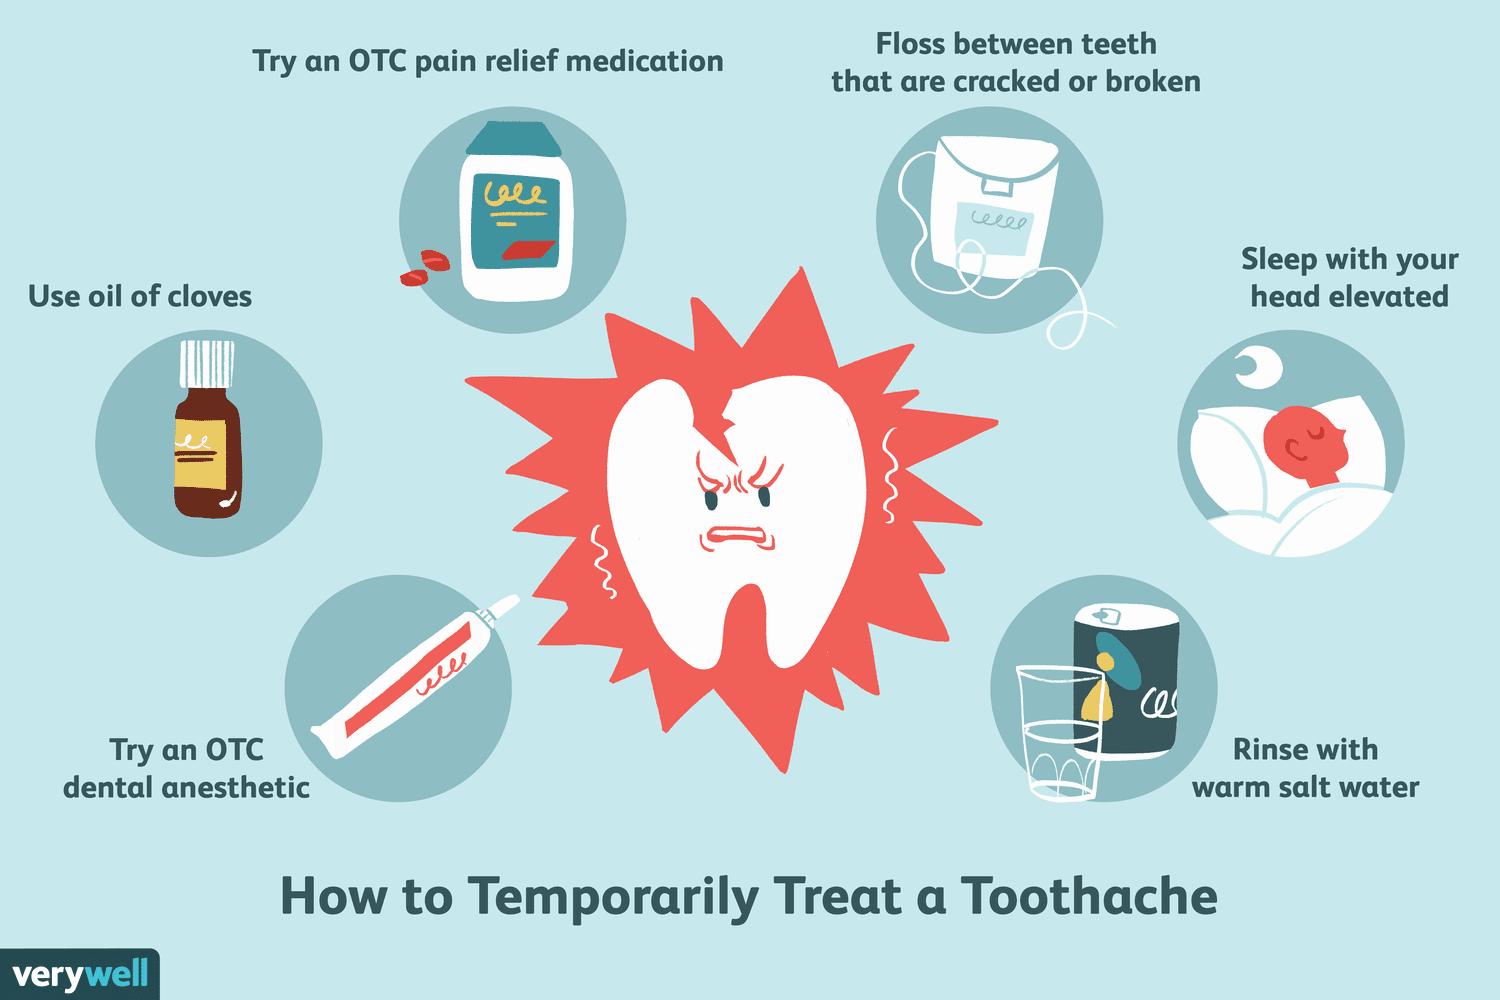 A tooth with a cavity is surrounded by six ways to temporarily treat a toothache.